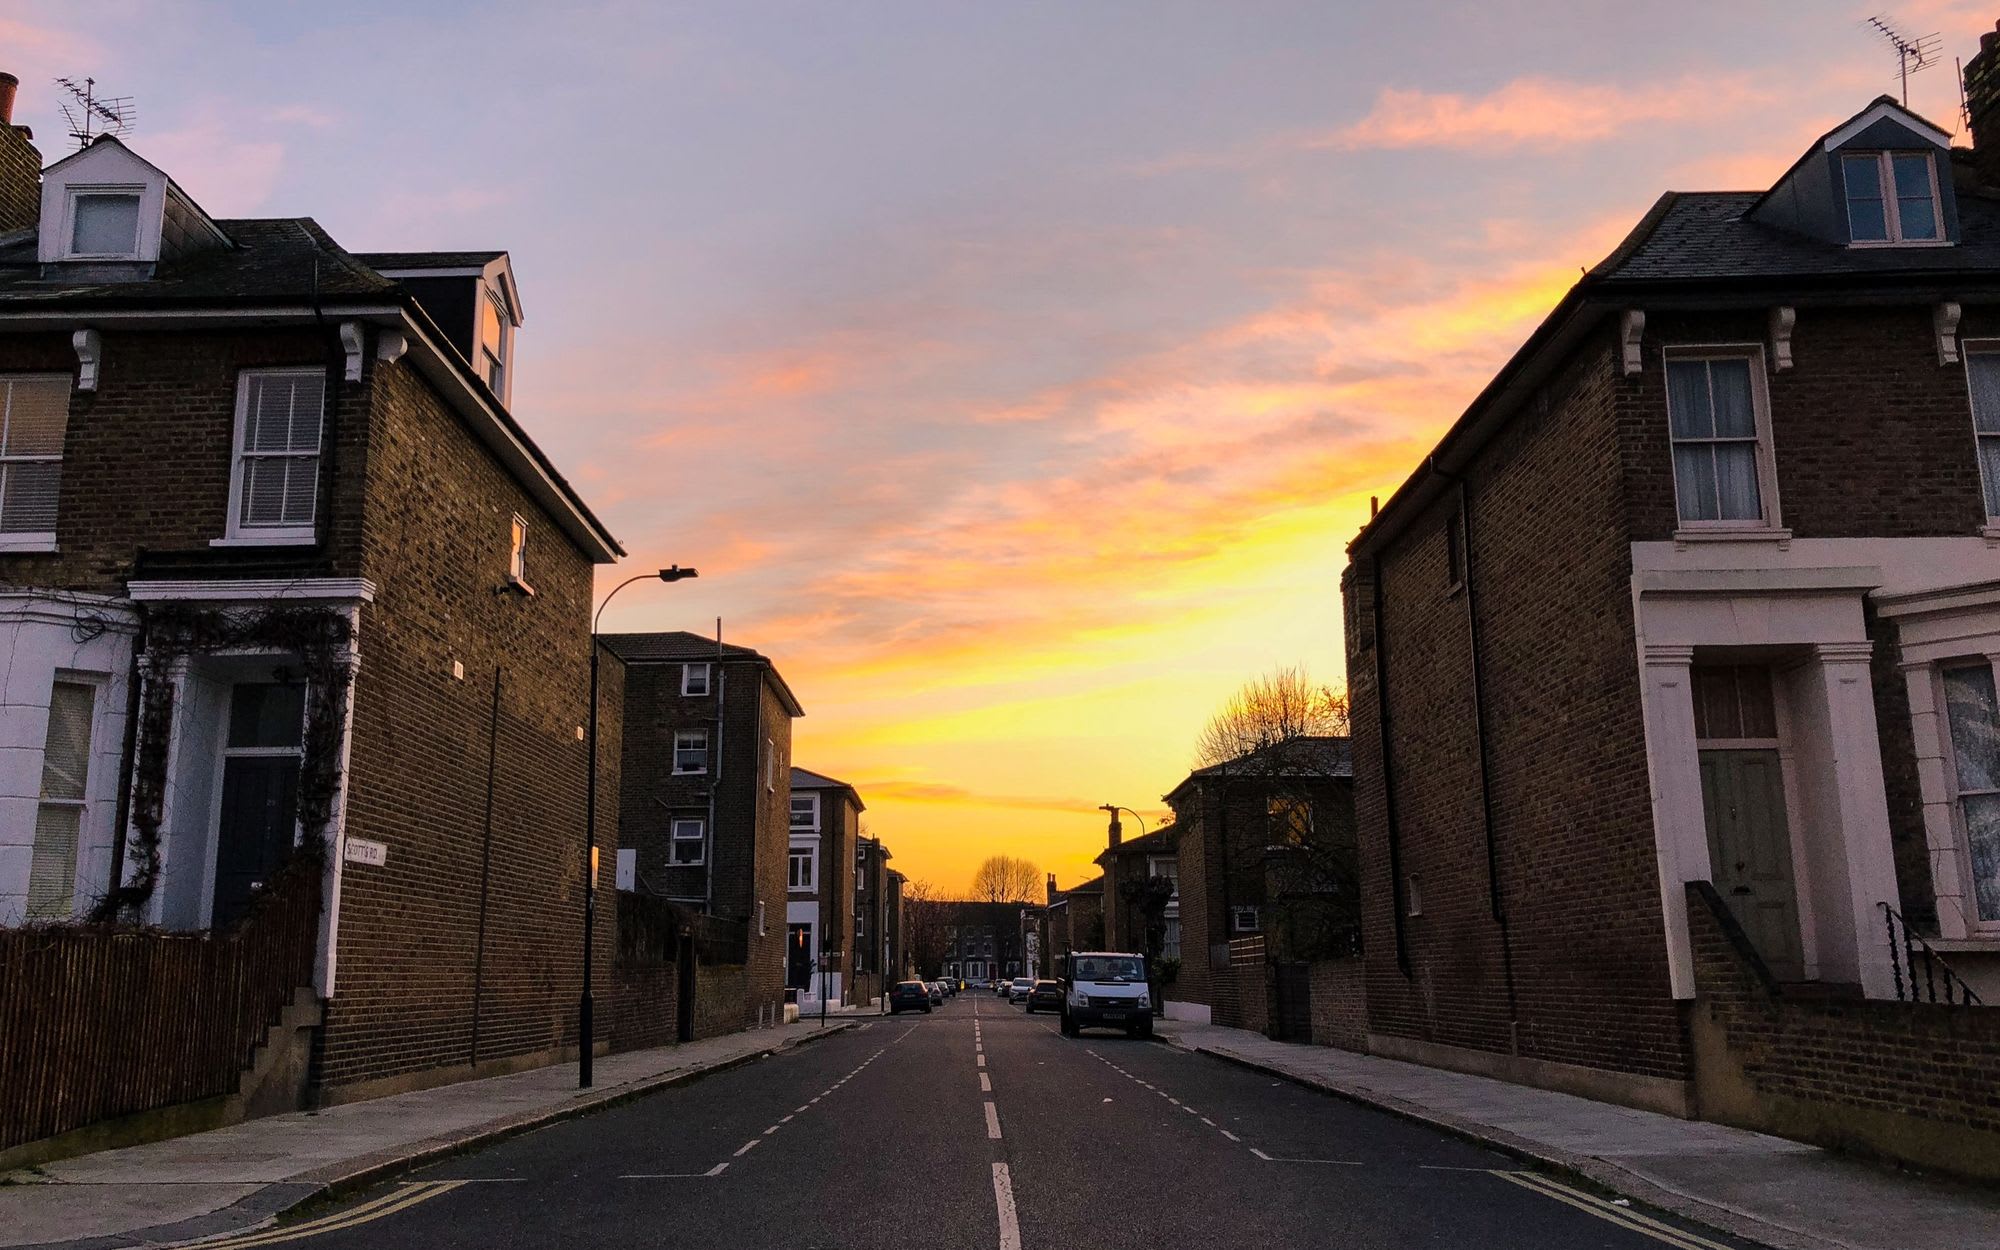 Sunset view of a residential street in West London